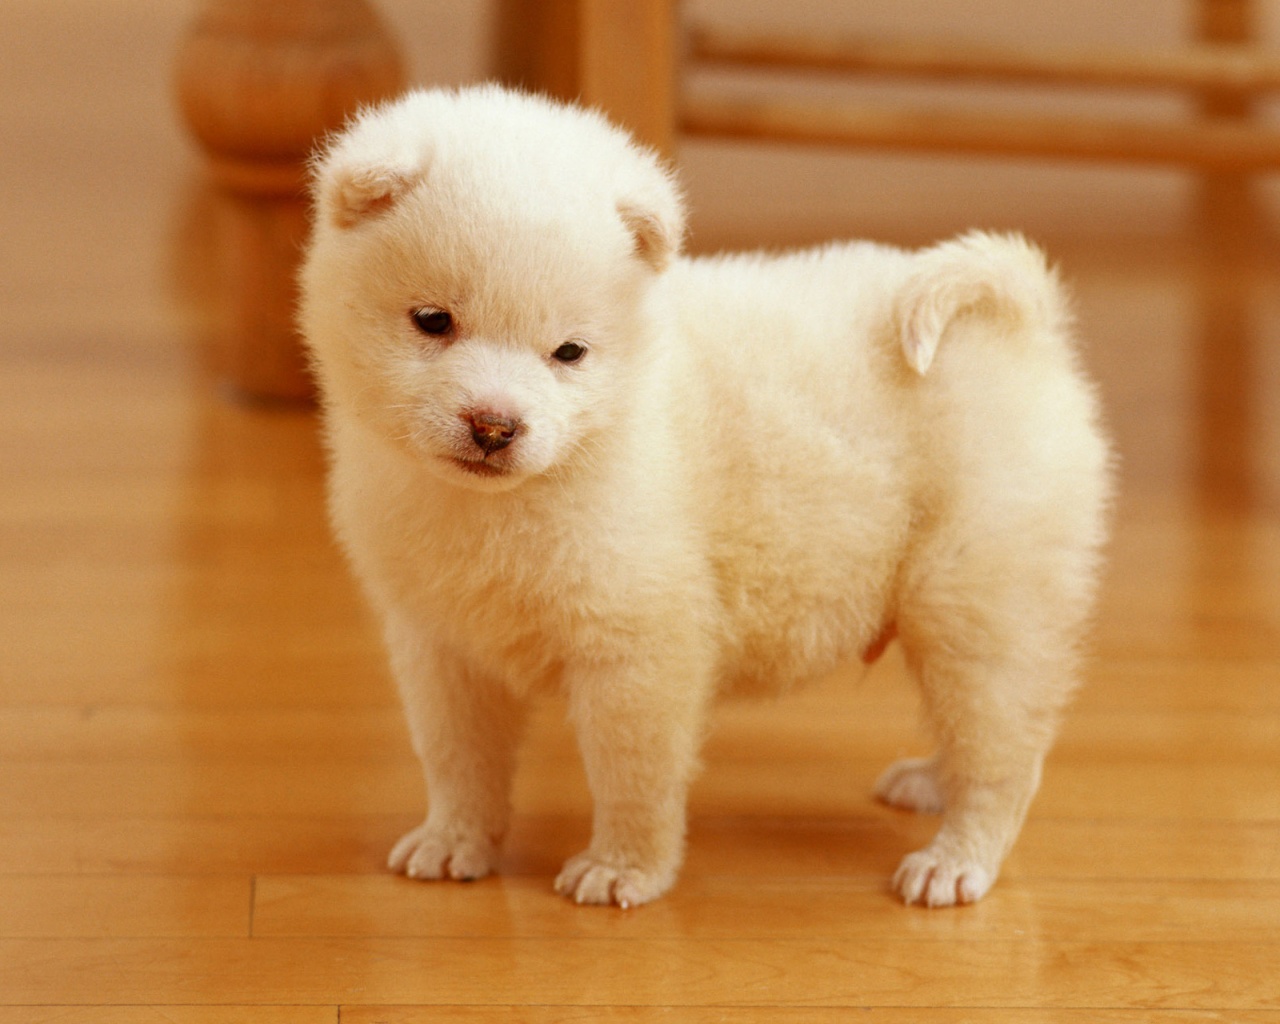 HD WALLPAPERS Cute puppies wallpapers